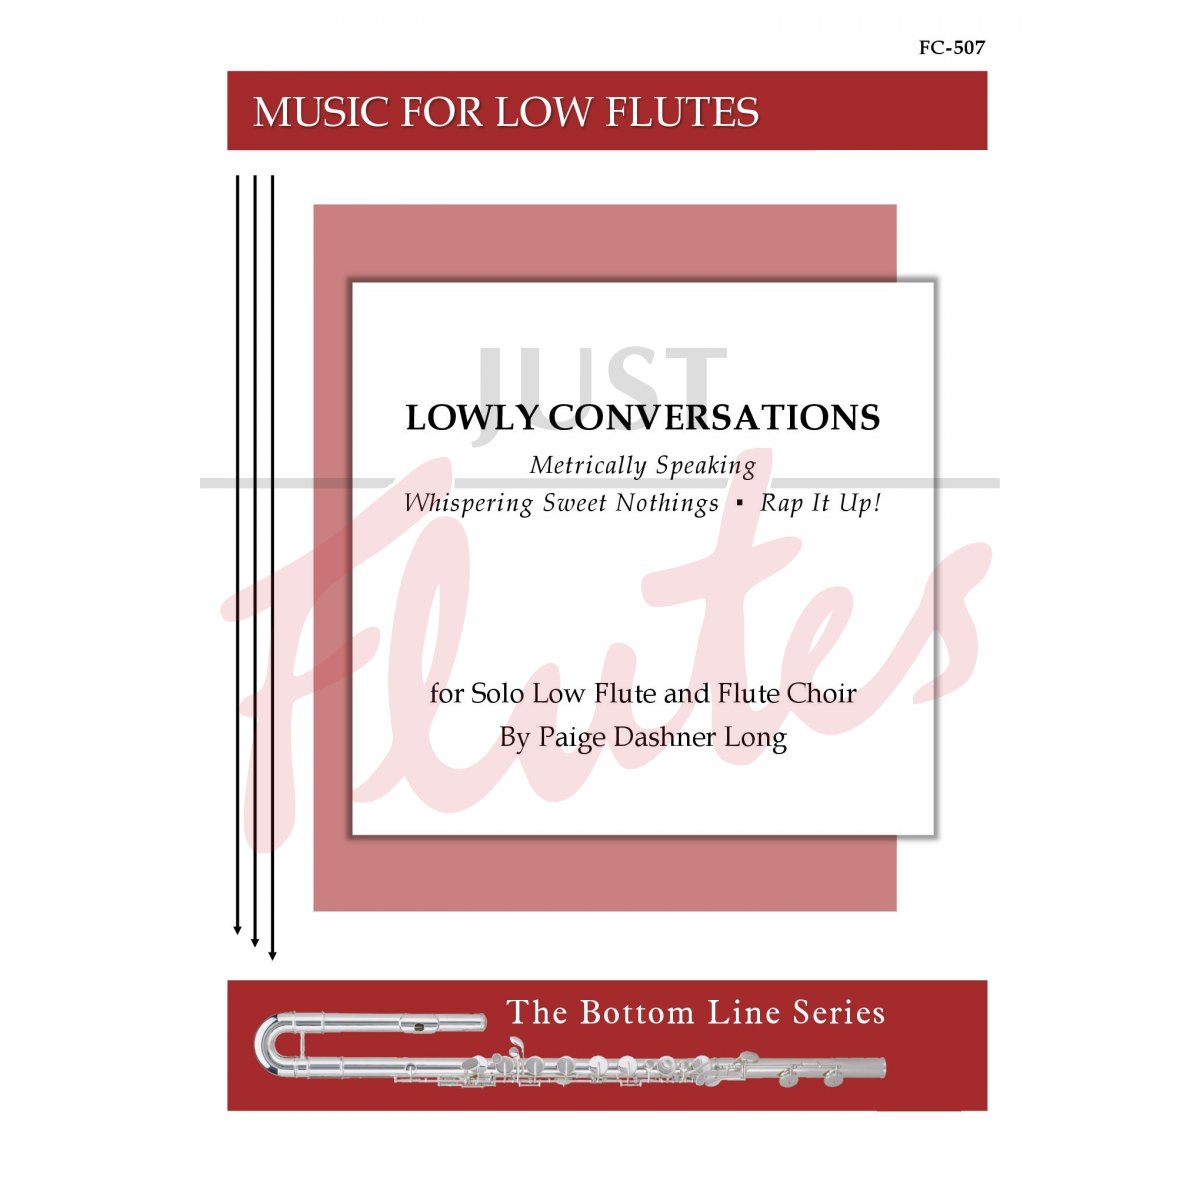 Lowly Conversations For Solo Low Flute And Flute Choir